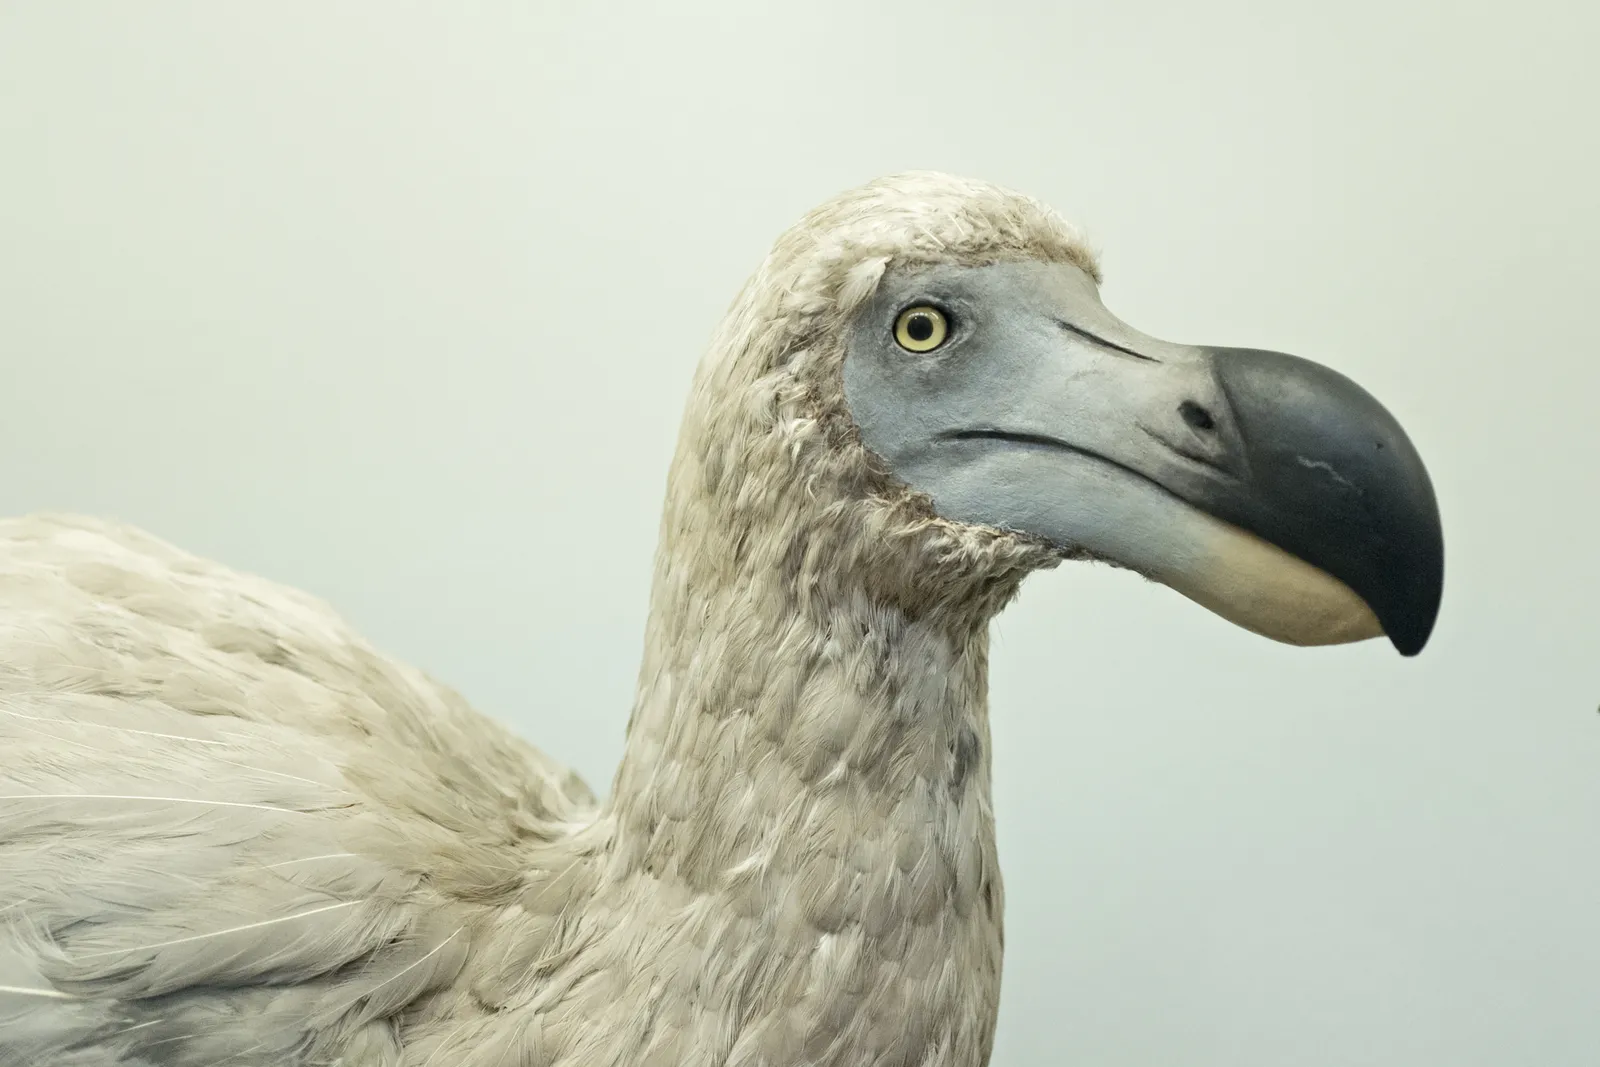 This Company Wants to Bring the Dodo Back From Extinction